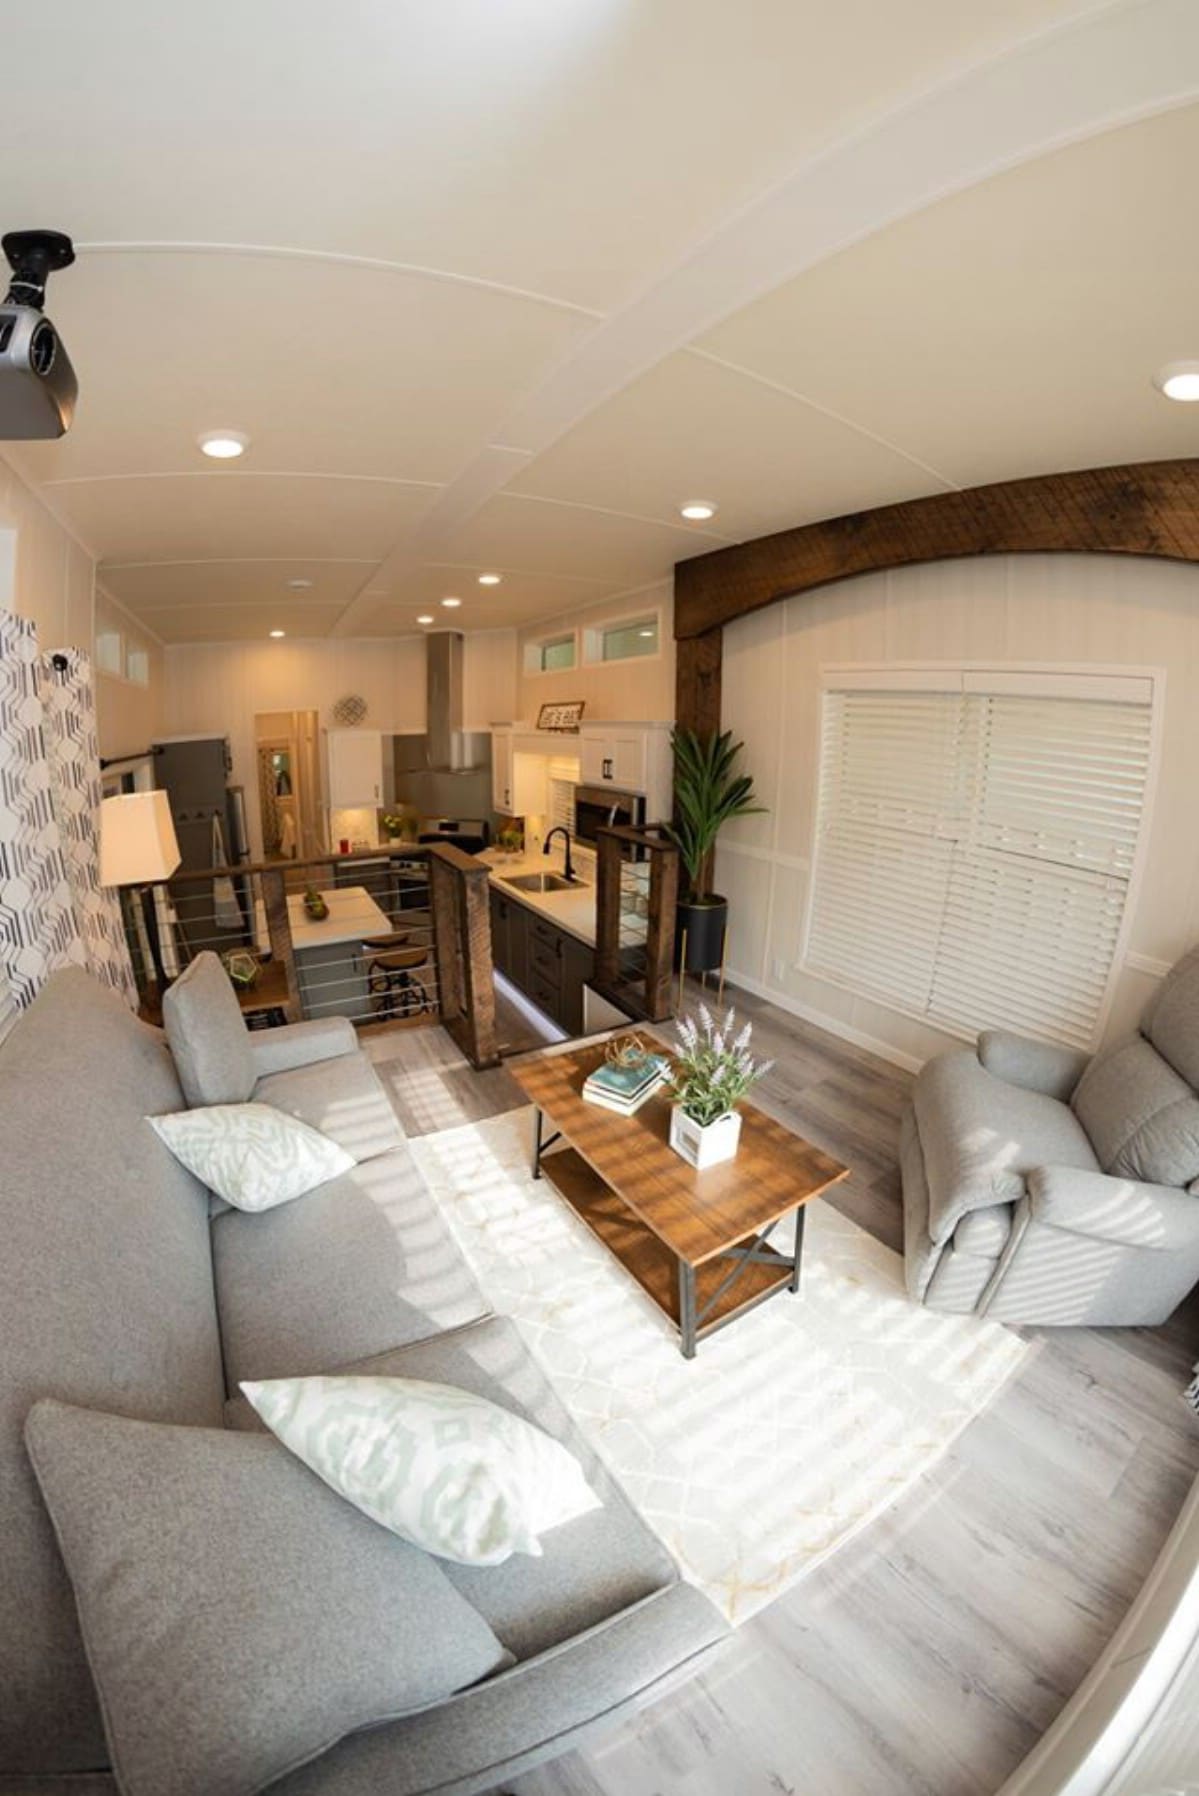 New Park Model Home Features Incredible Basement Storage